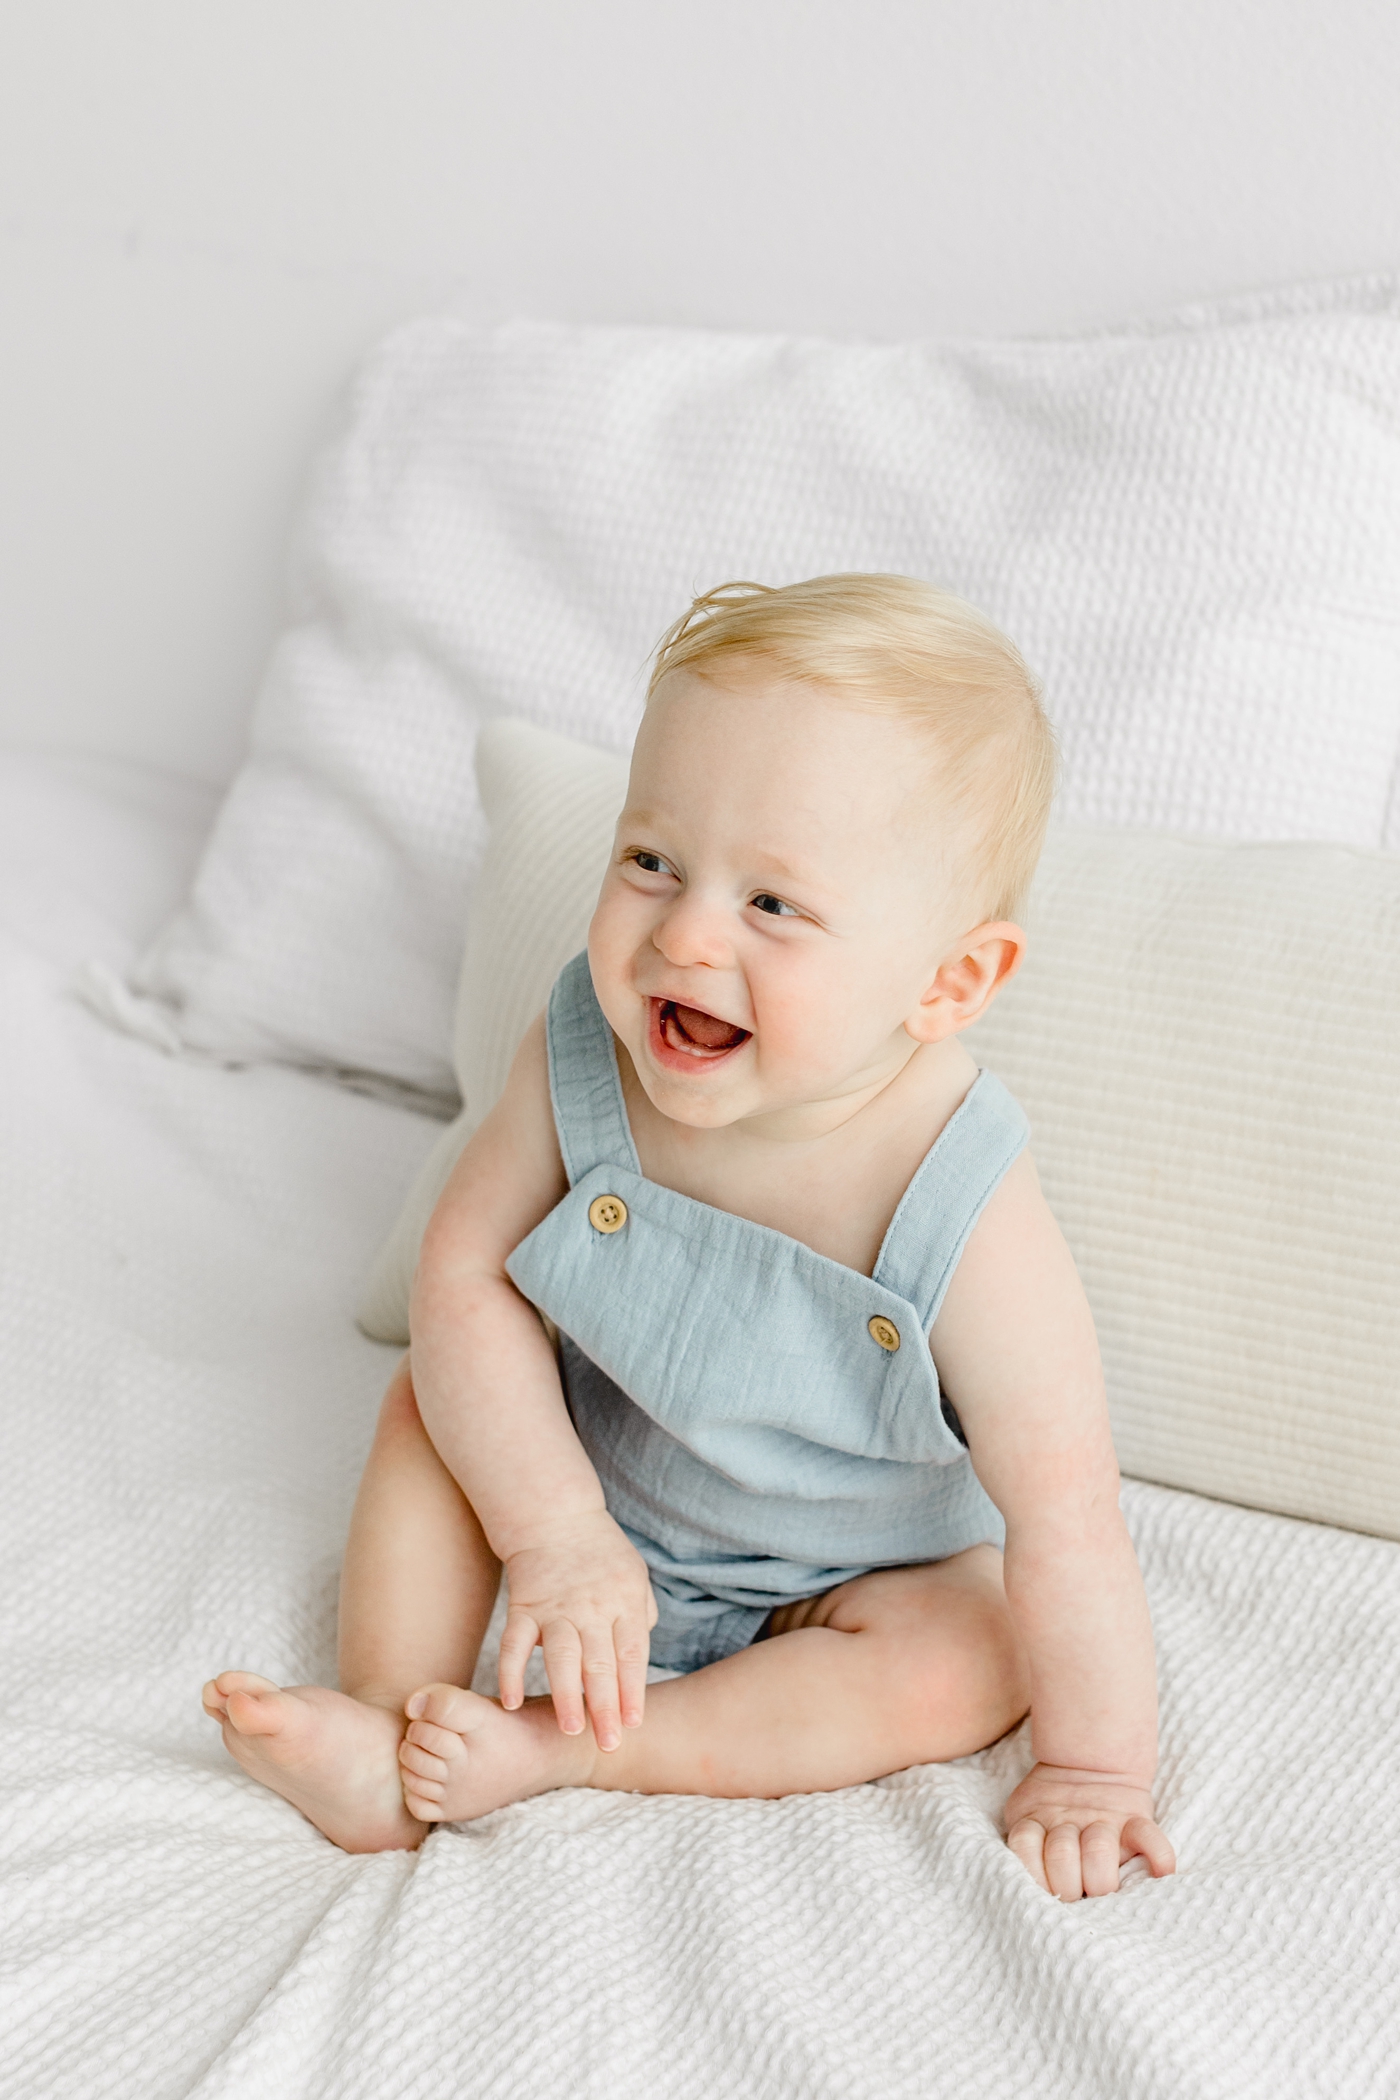 Smiling little boy in blue romper during first birthday milestone session. Photo by Sana Ahmed Photography.